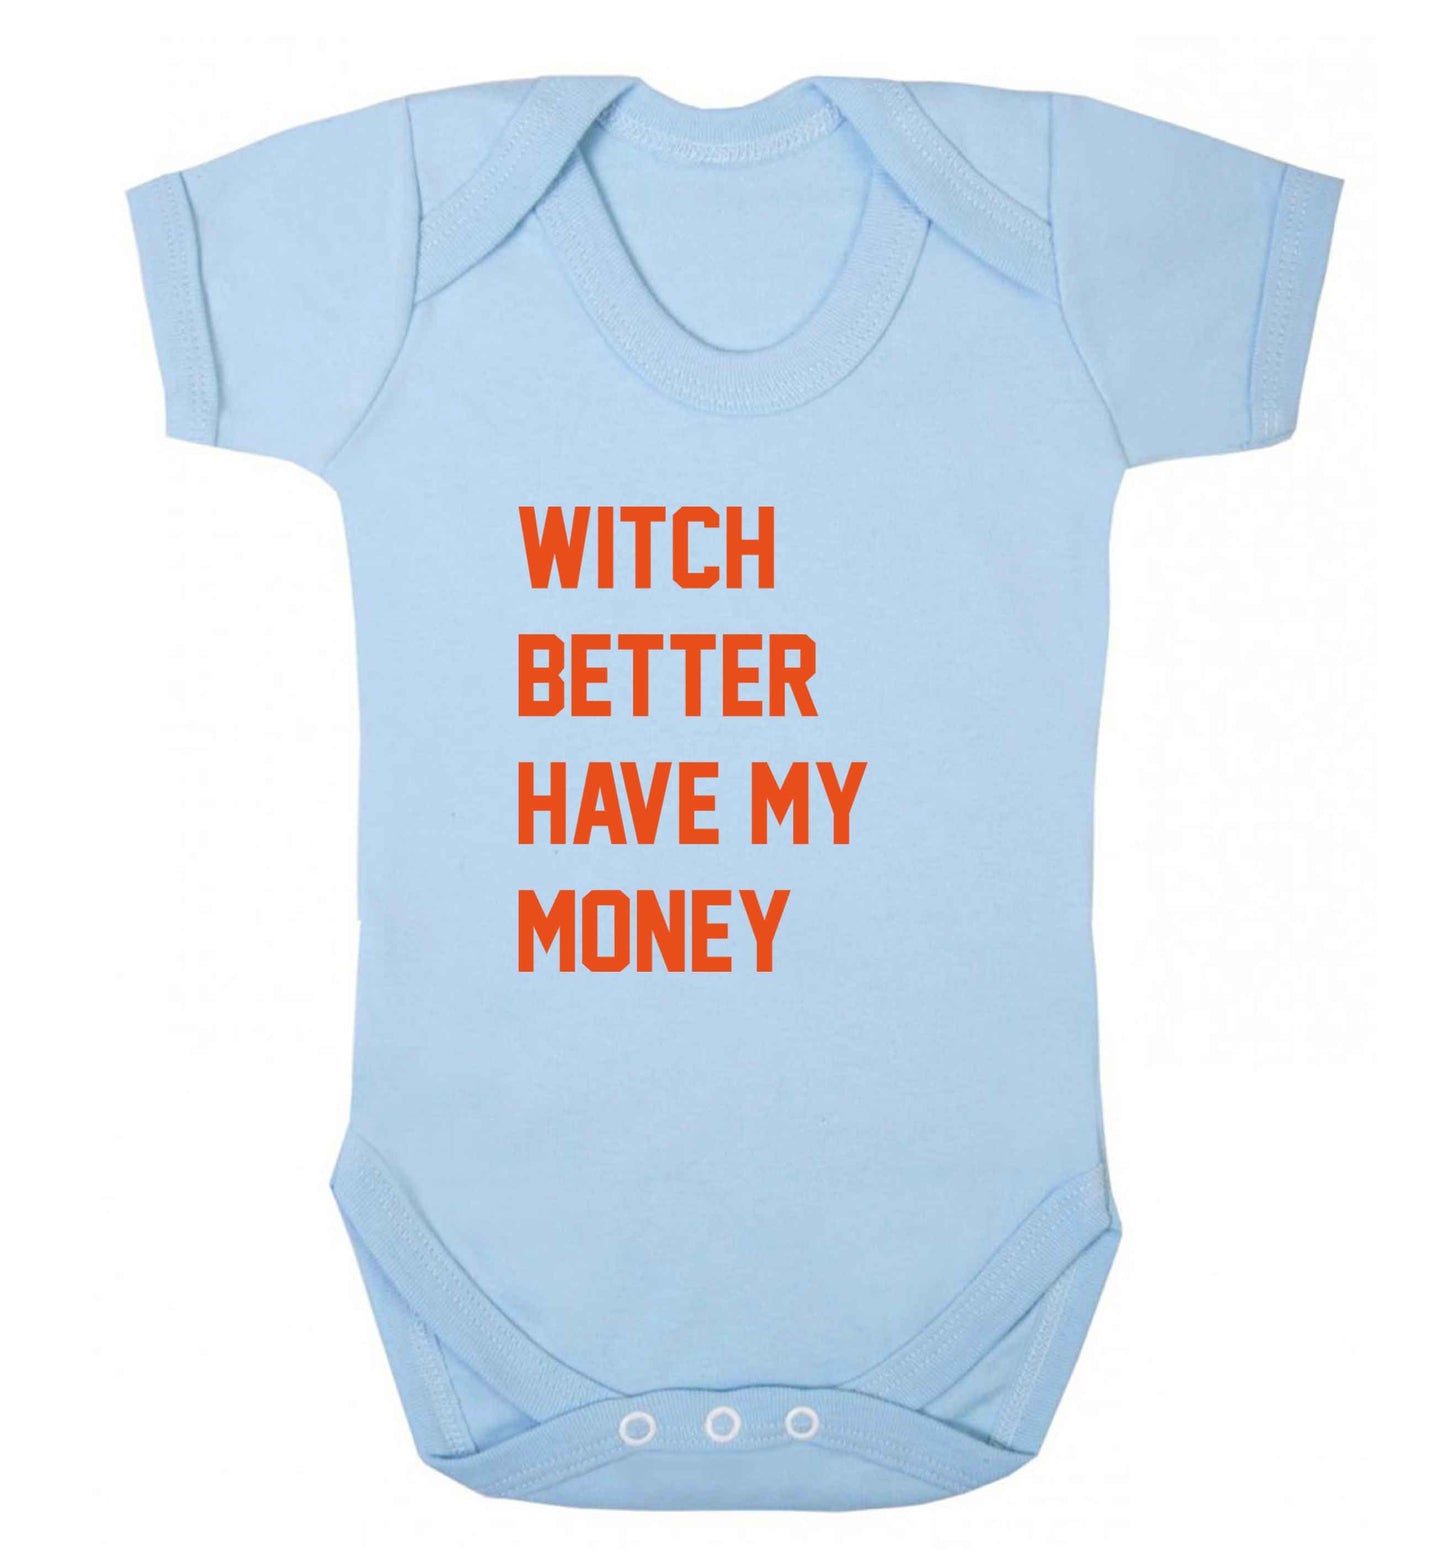 Witch better have my money baby vest pale blue 18-24 months